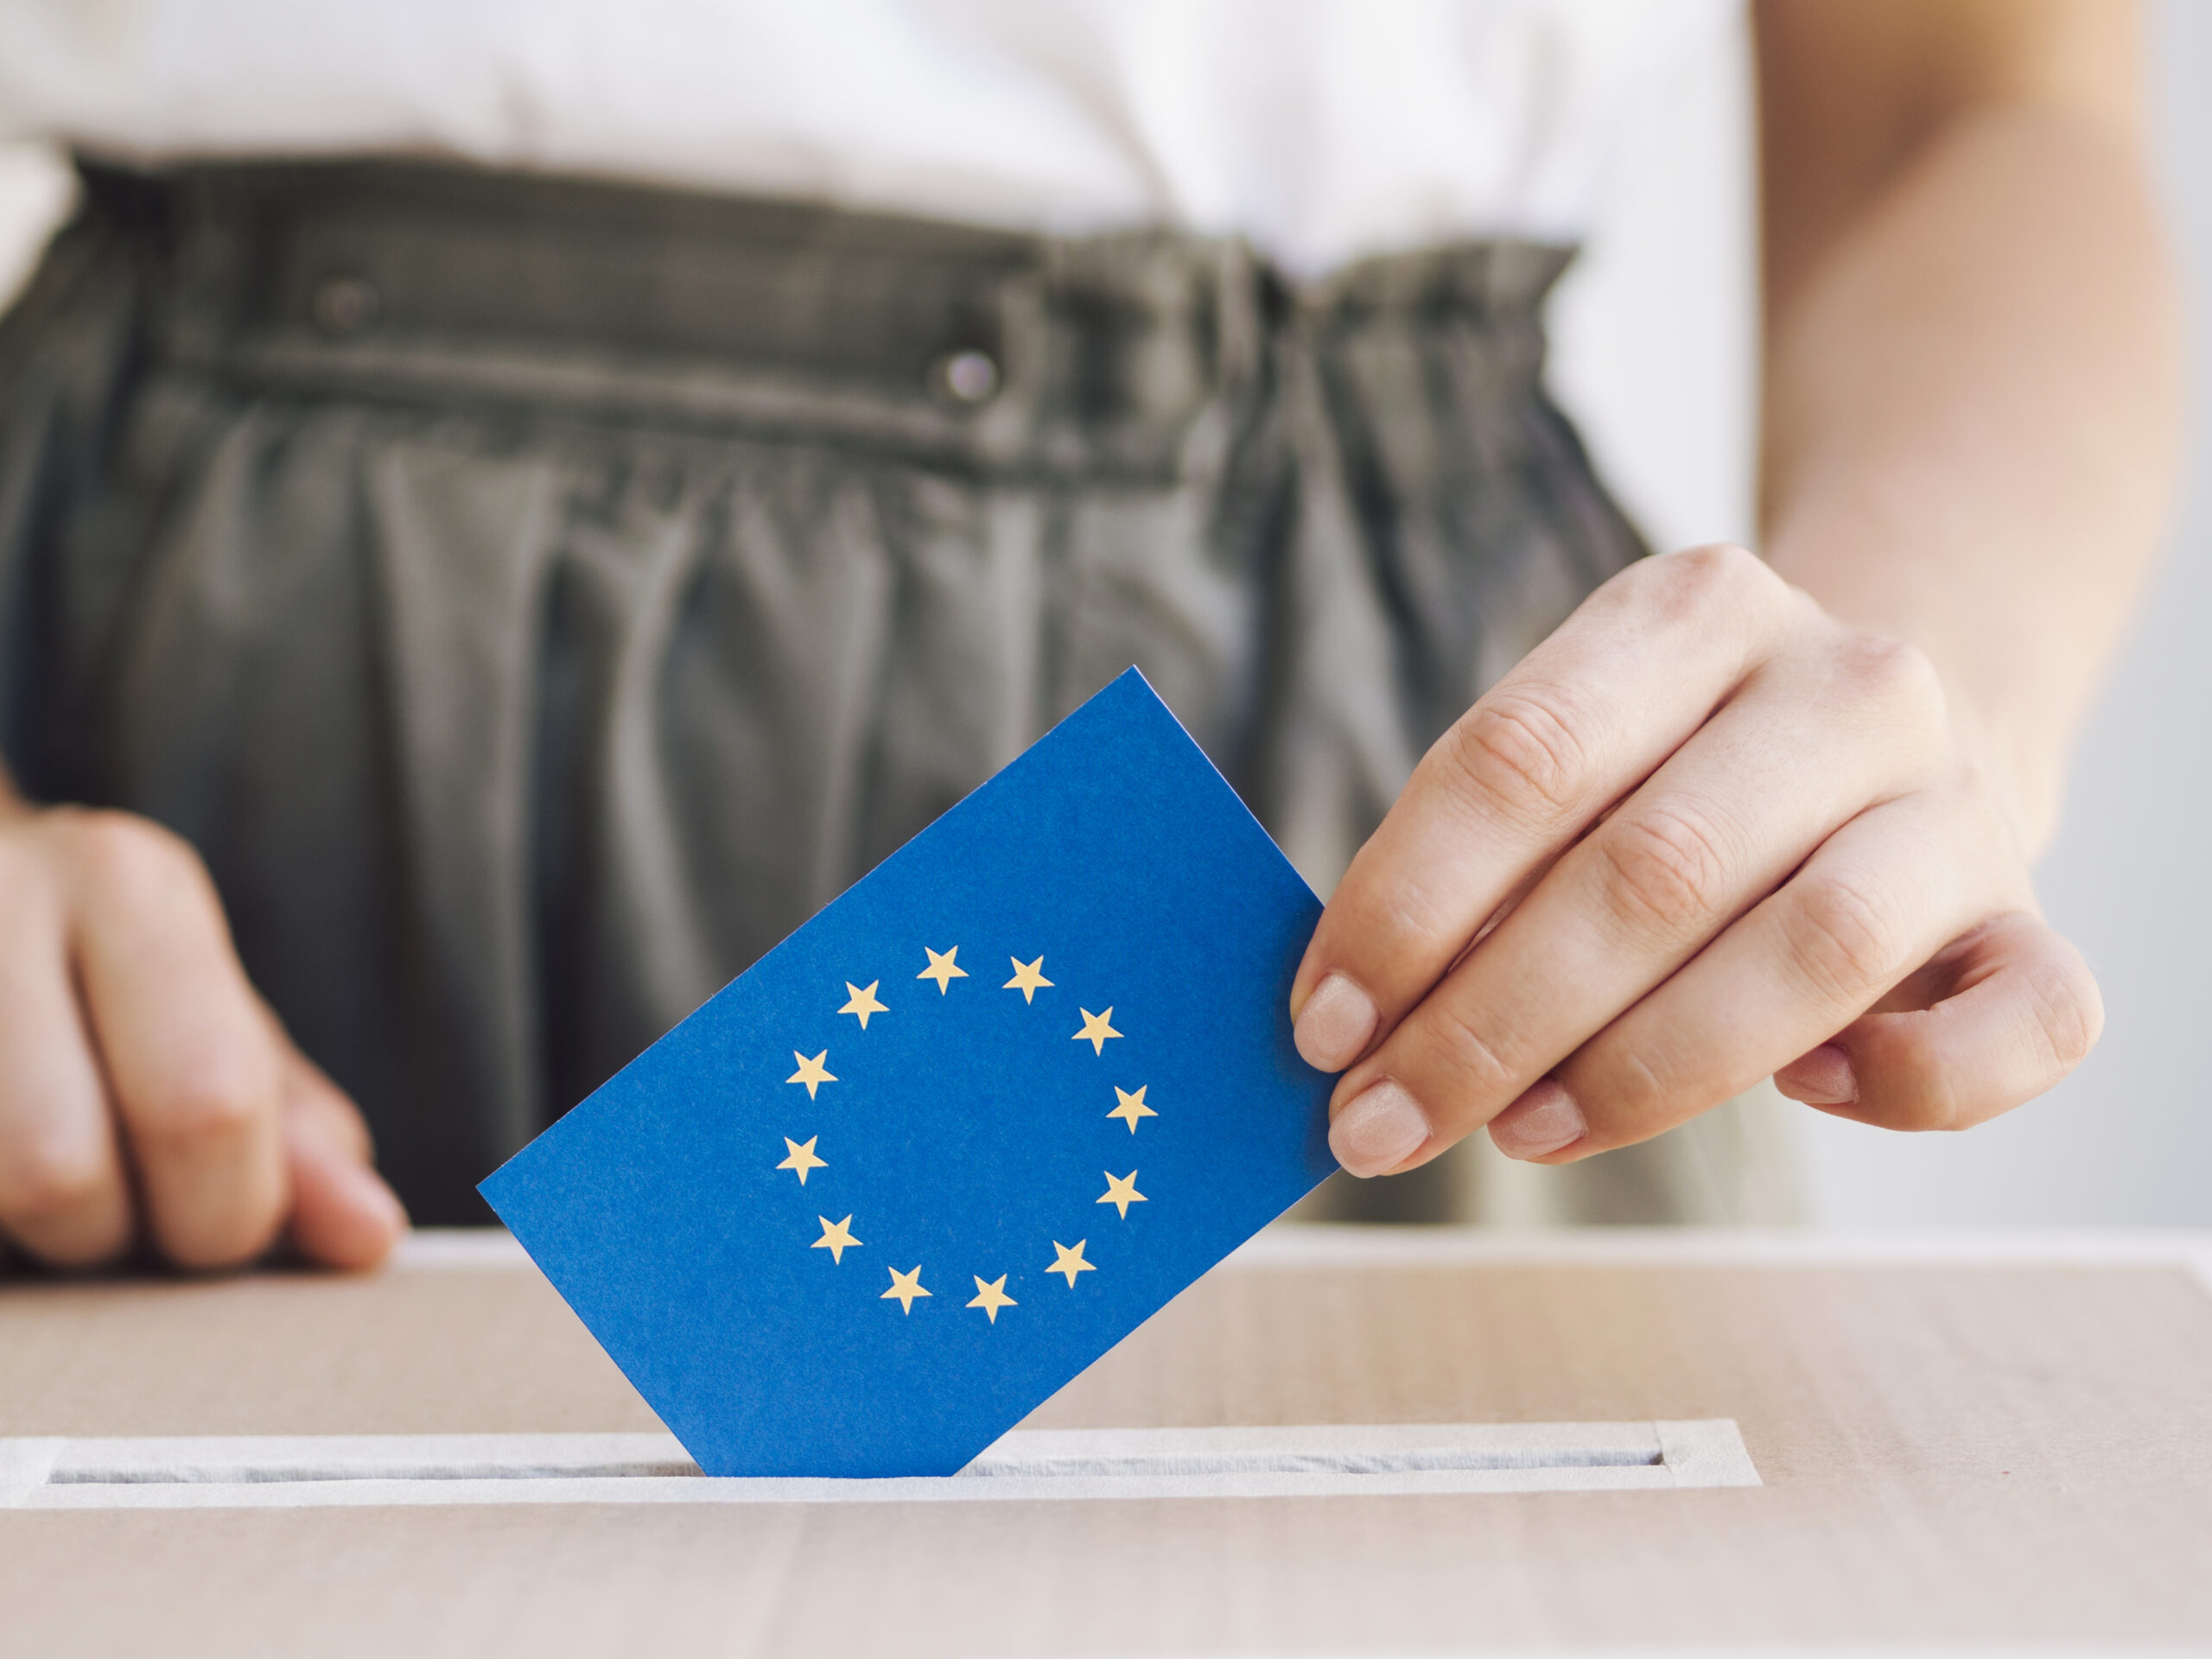 From Migration to Participation: What Are the Key Issues for Young People in the EU Elections?